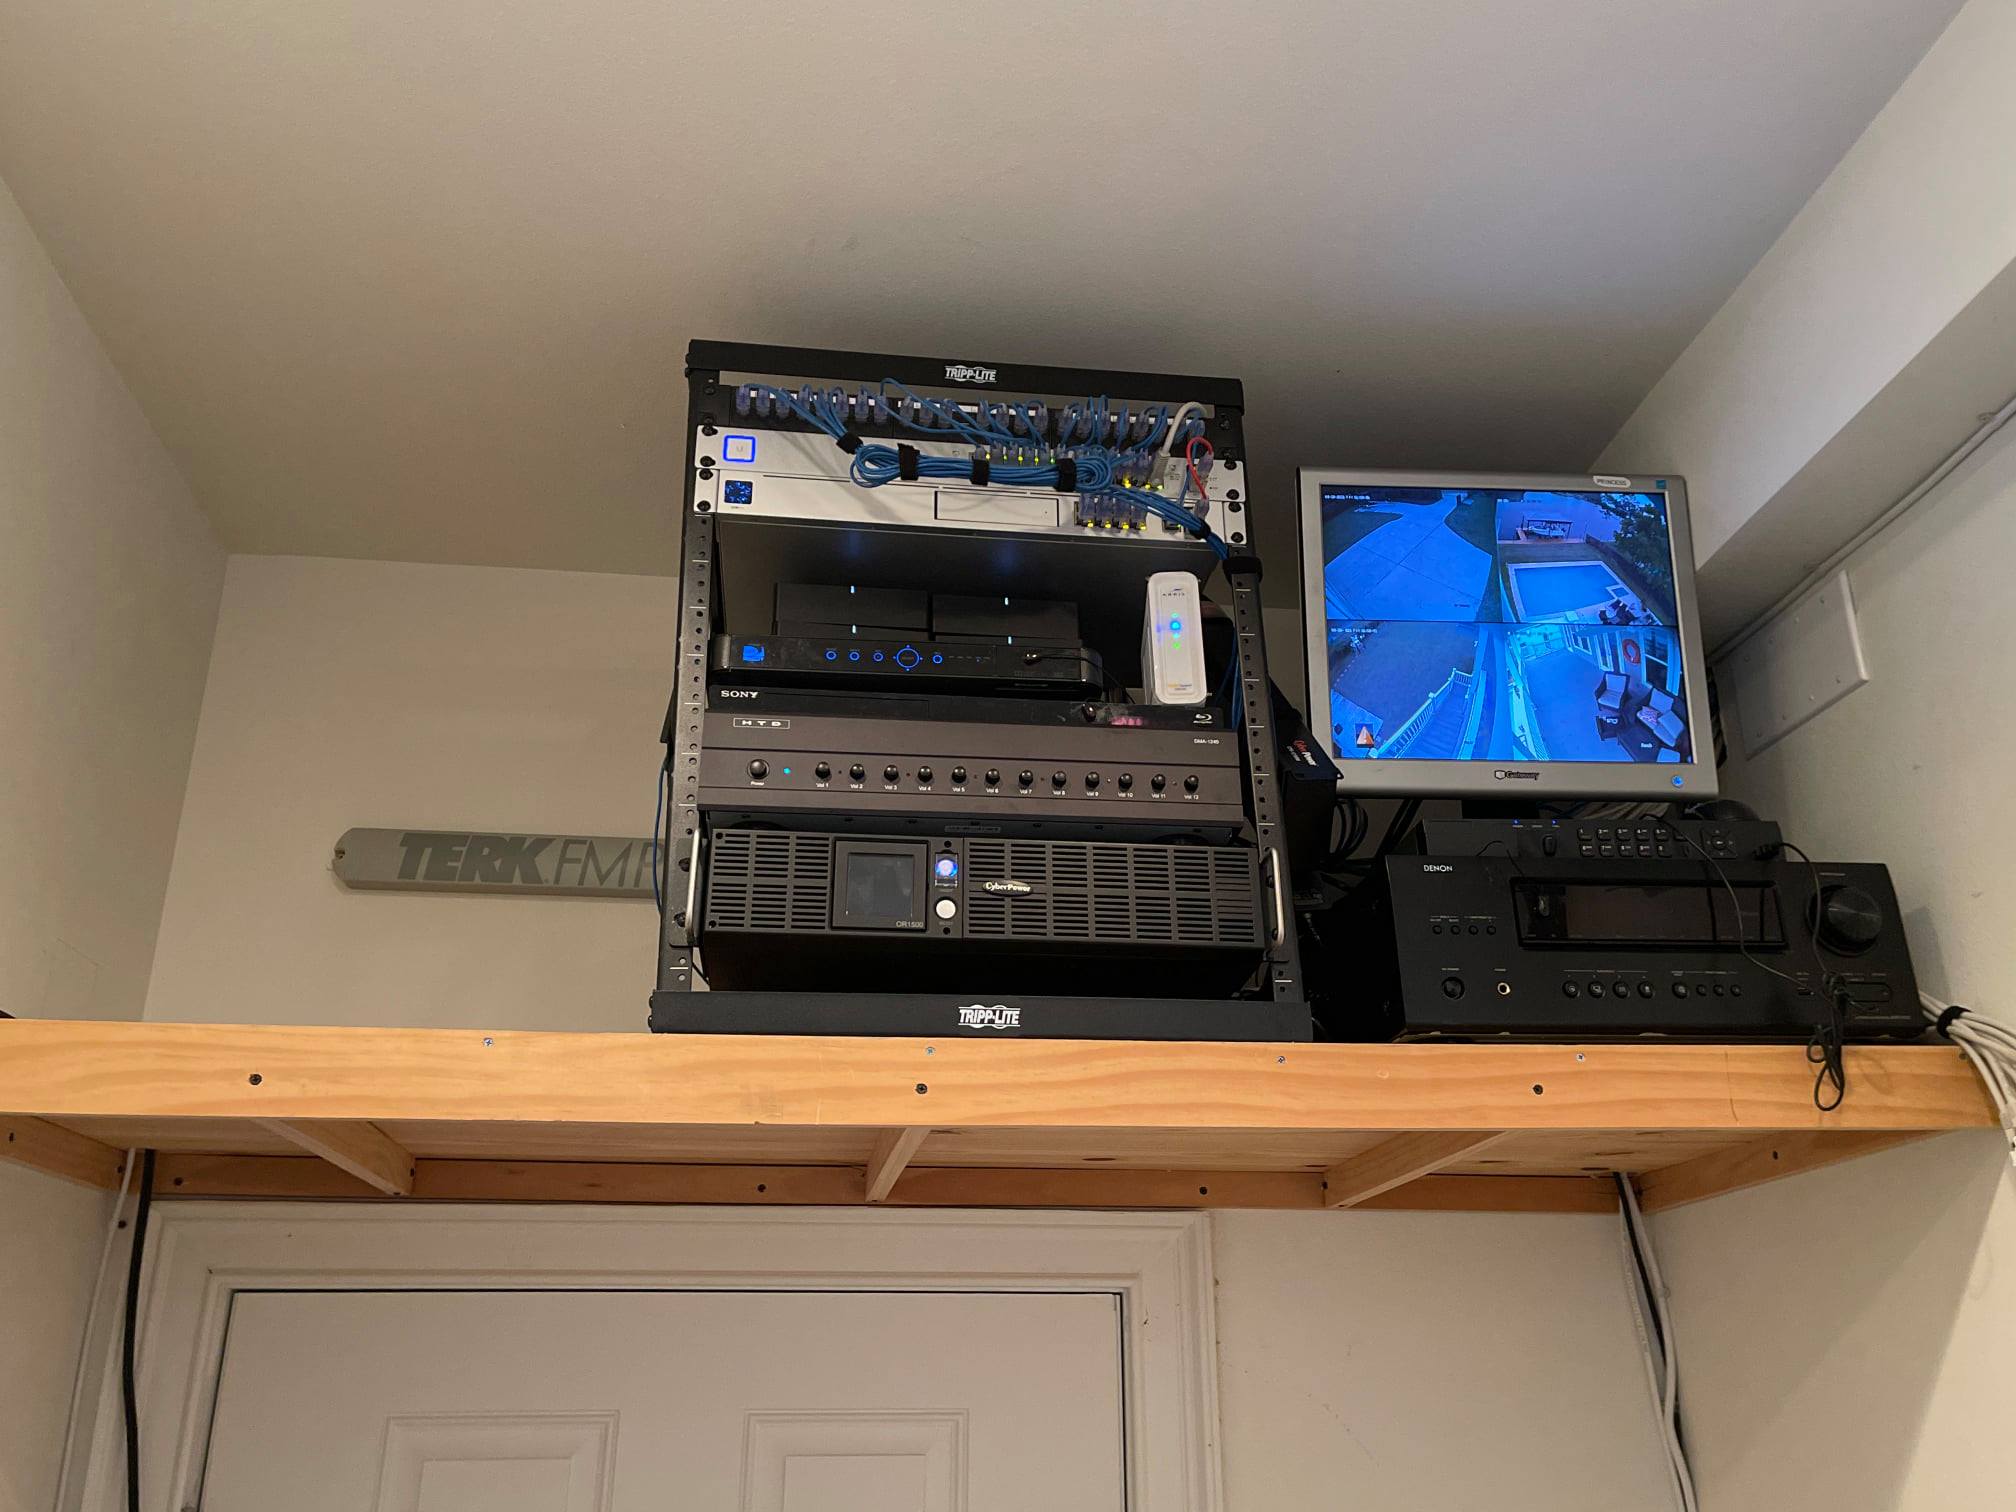 New Network, SONOS and Cleanup